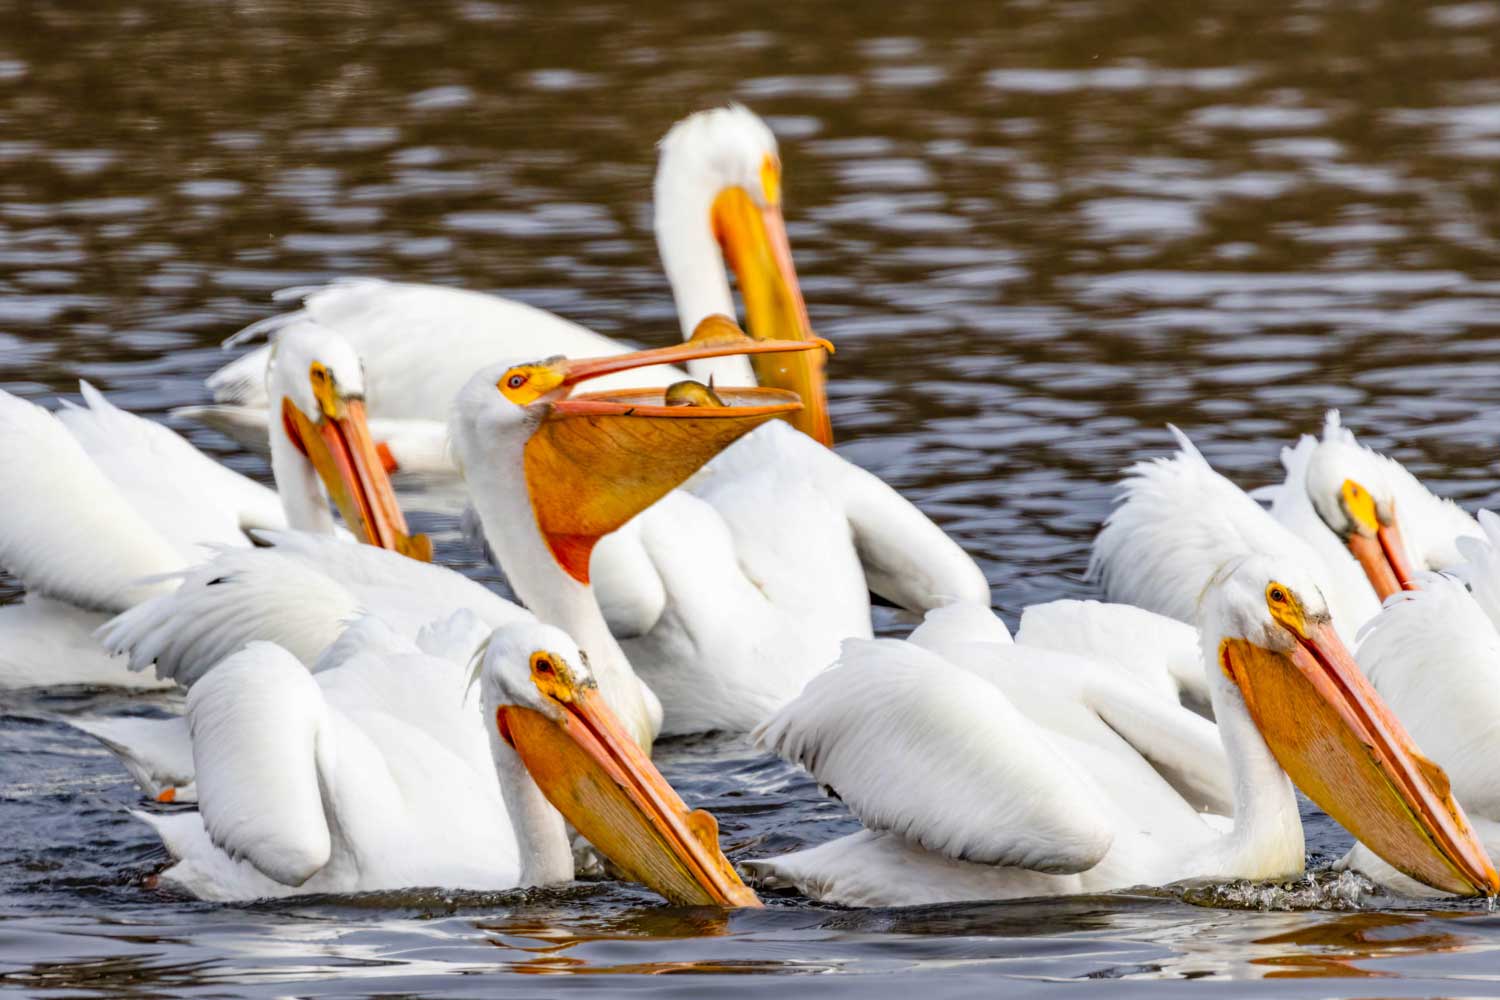 A group of swimming pelicans dipping their bills in the water to eat, with one pelican catching a fish.